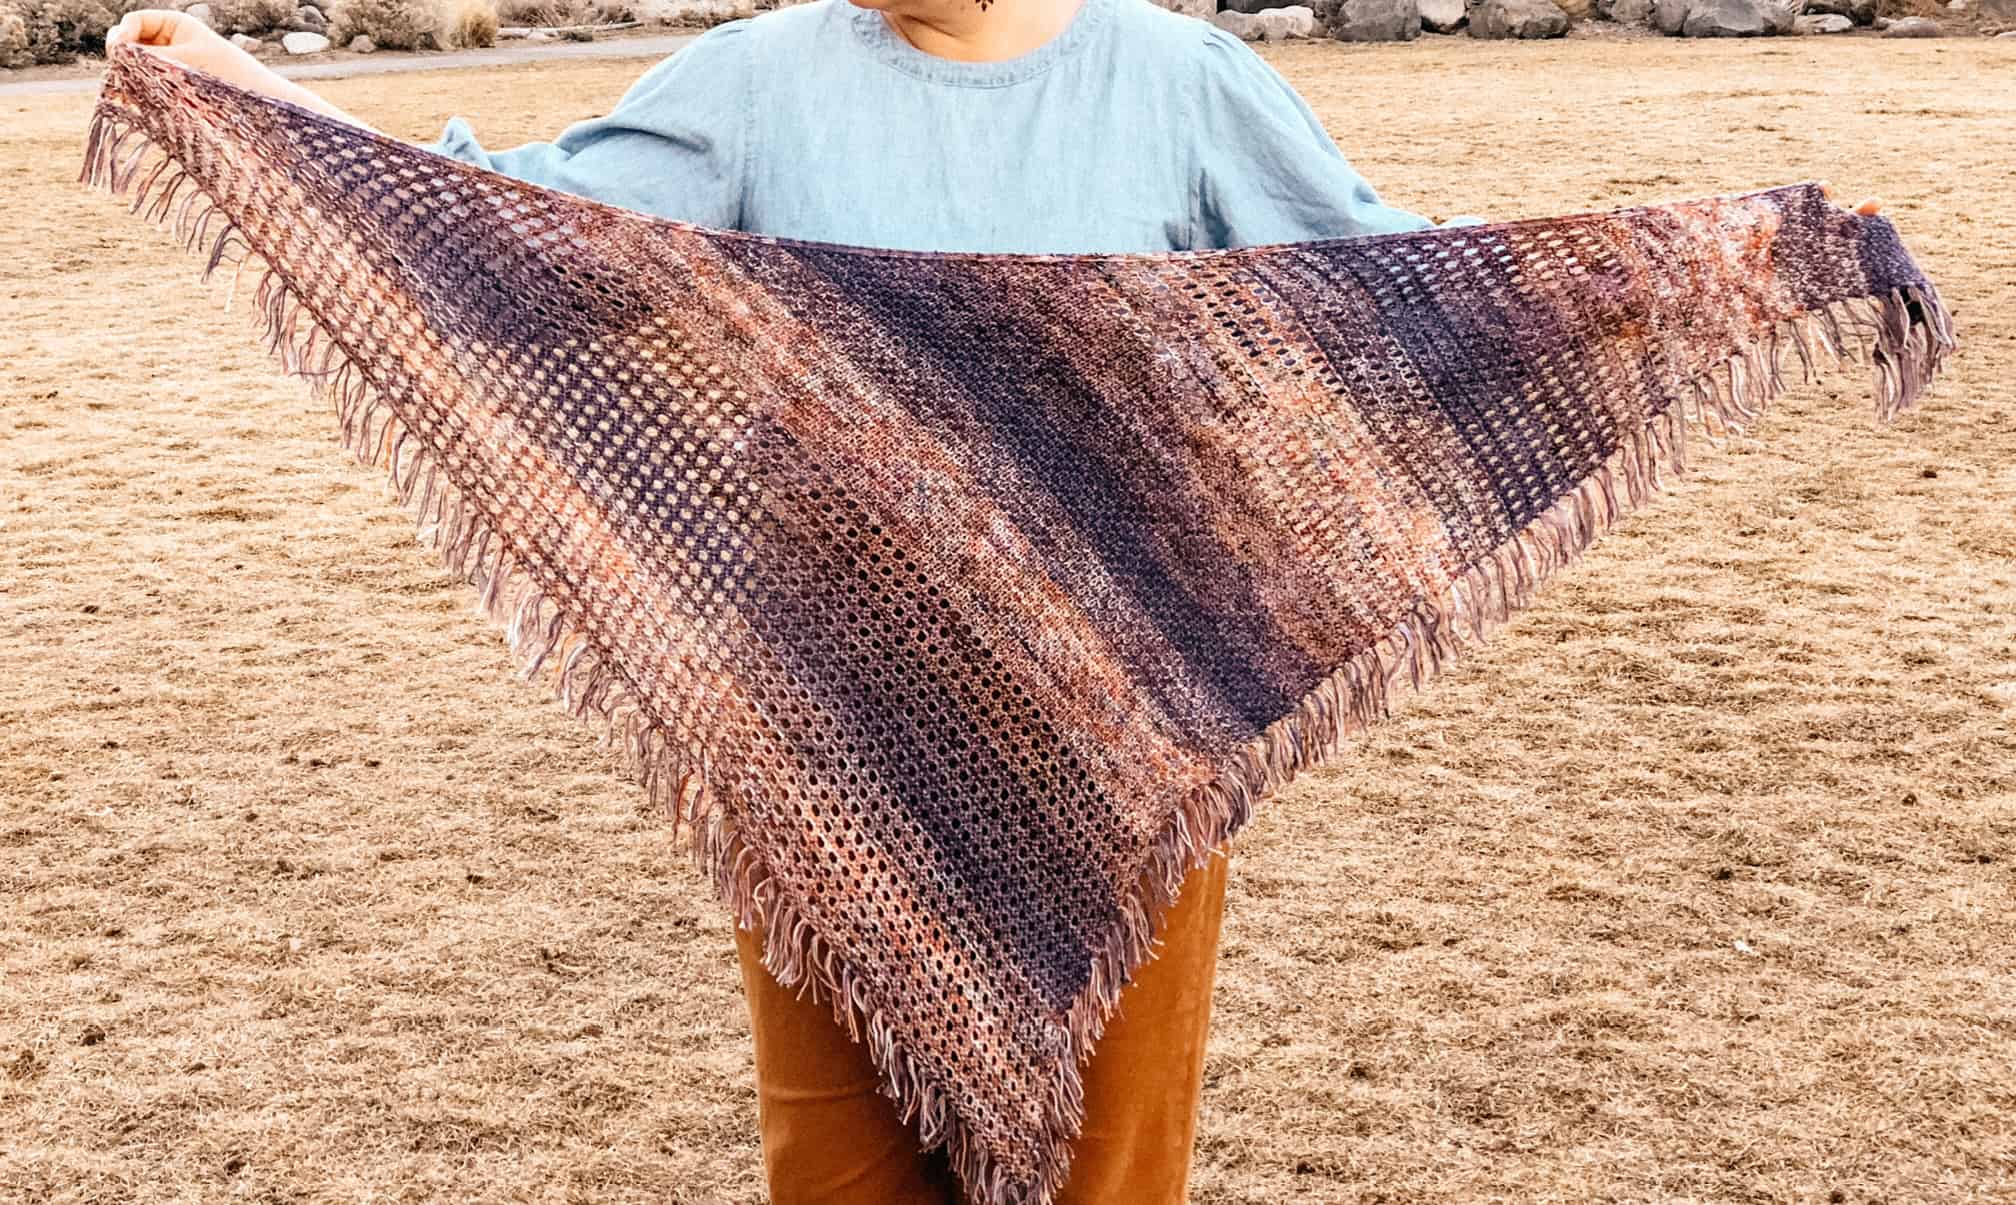 A textured and eyelet shawl with fringe in orange, purple and blue faded yarn.